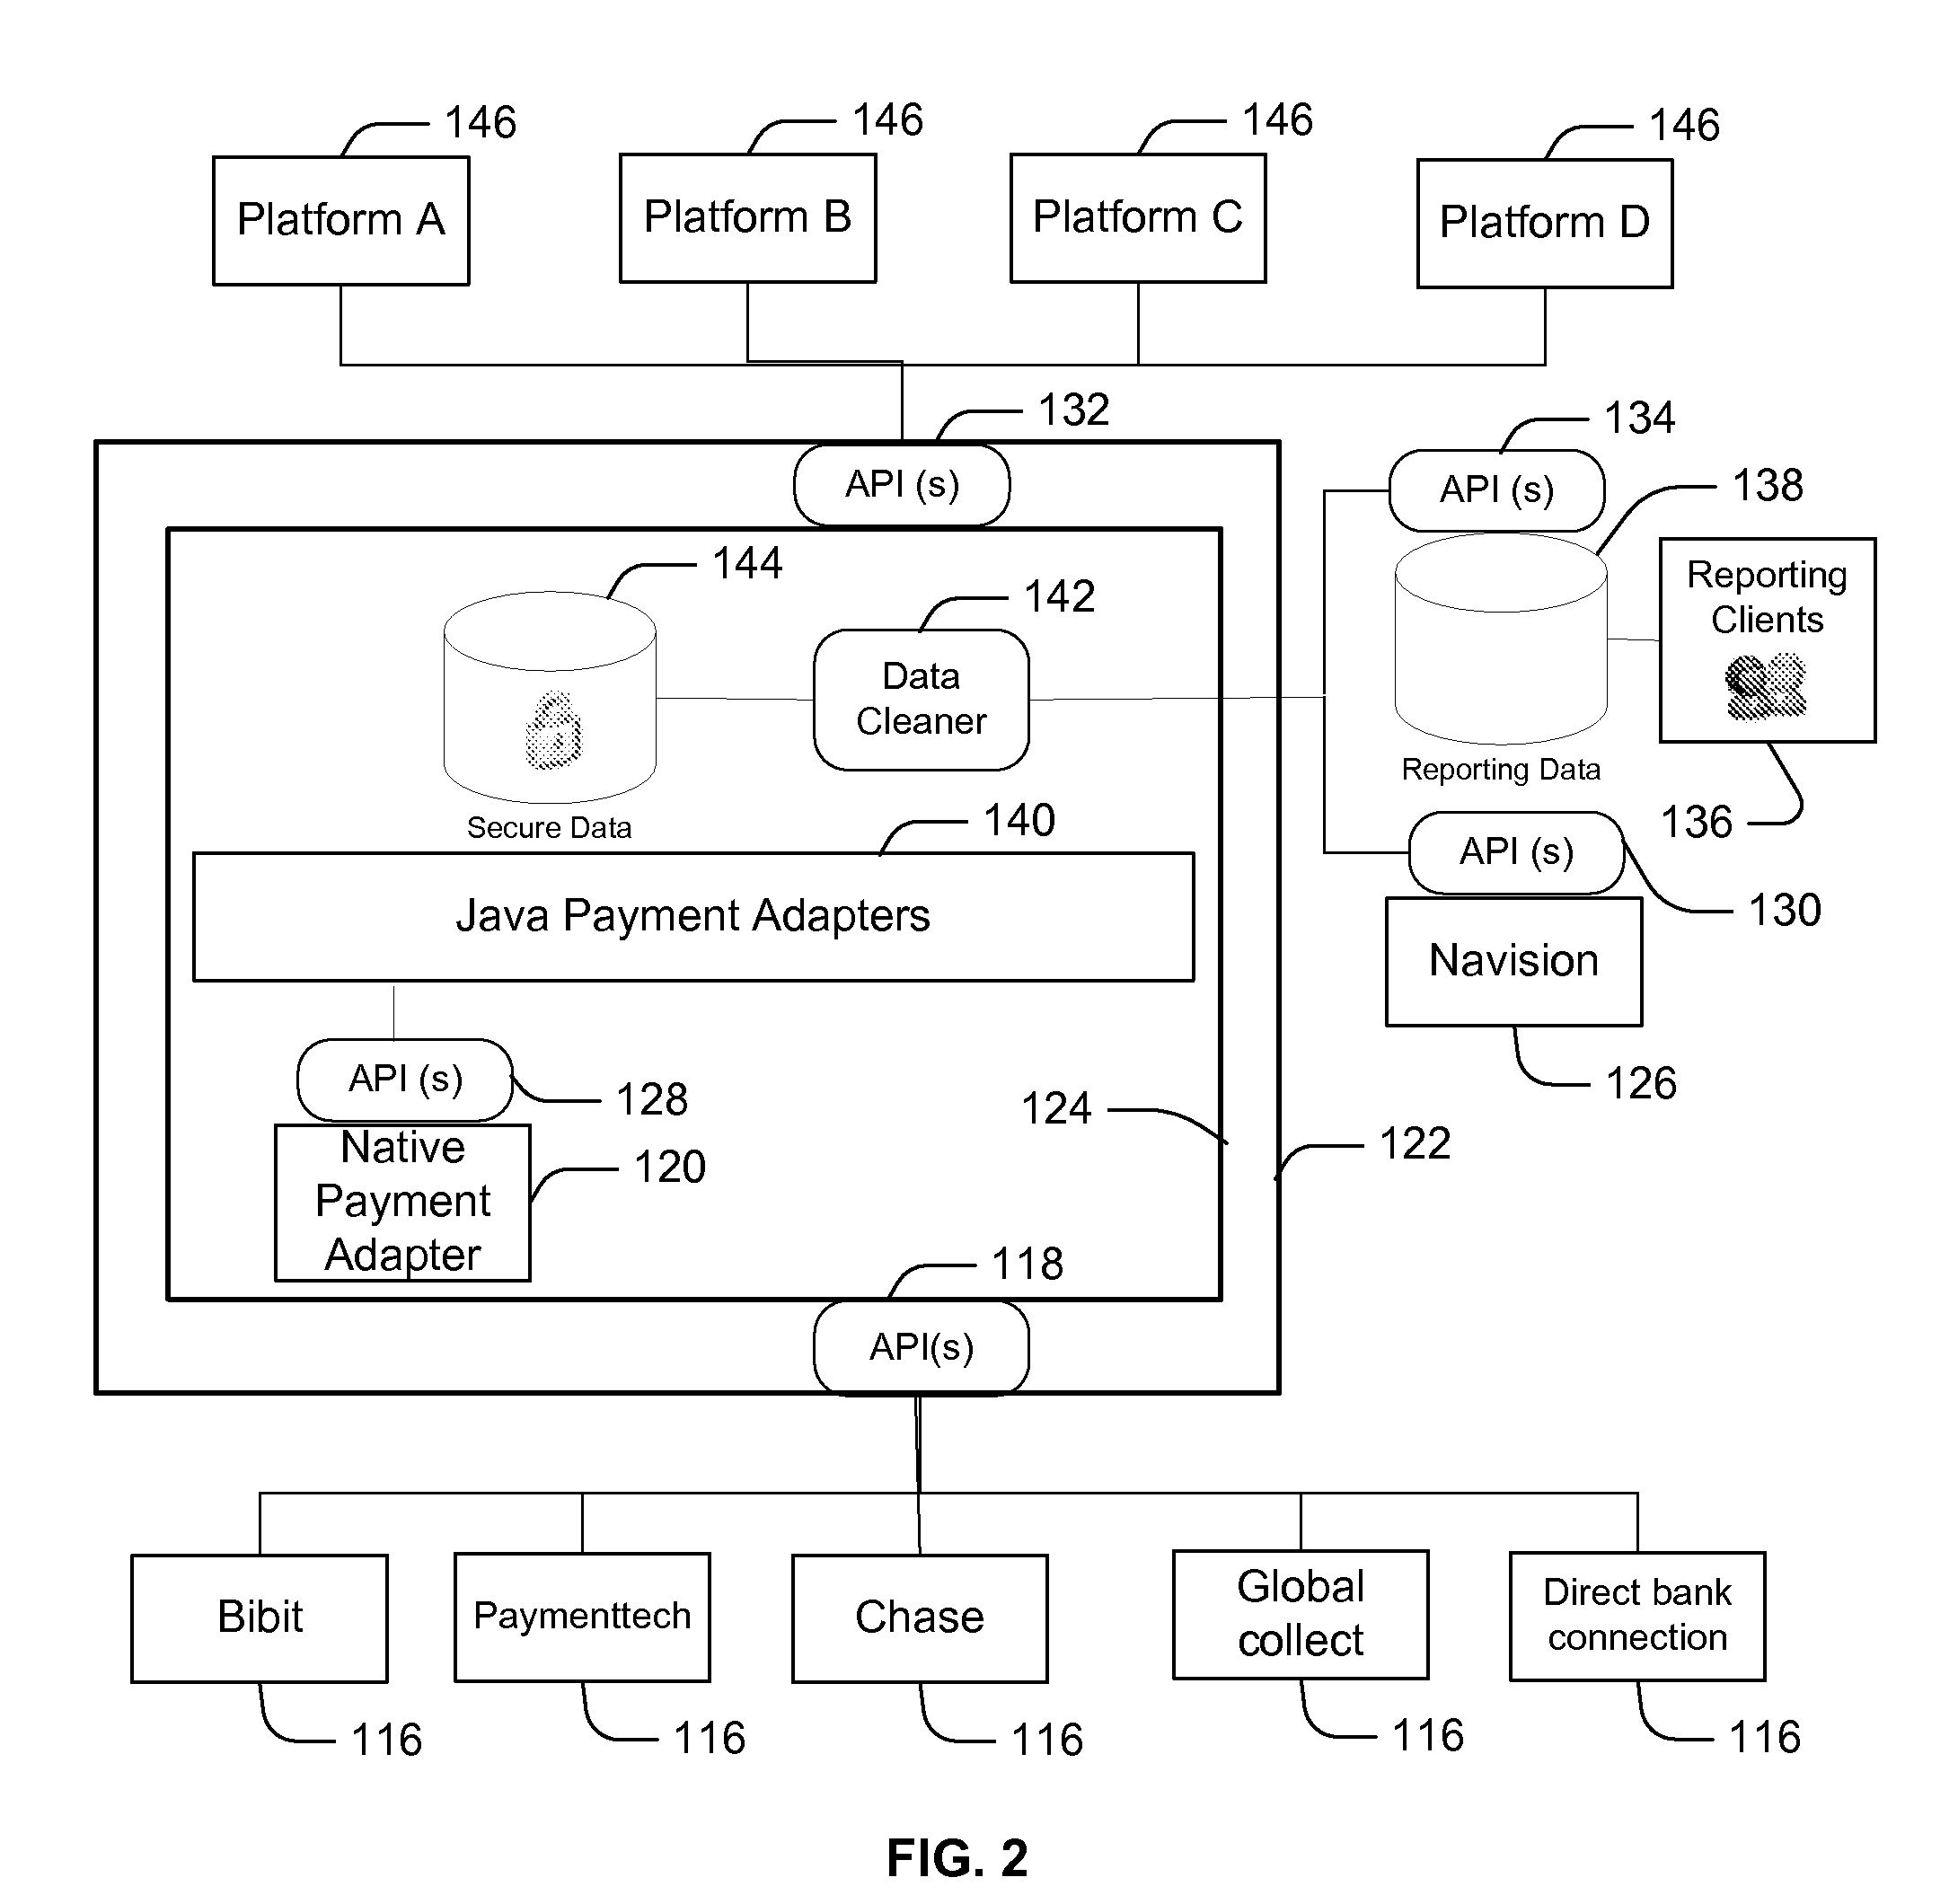 Centralized Payment Gateway System and Method